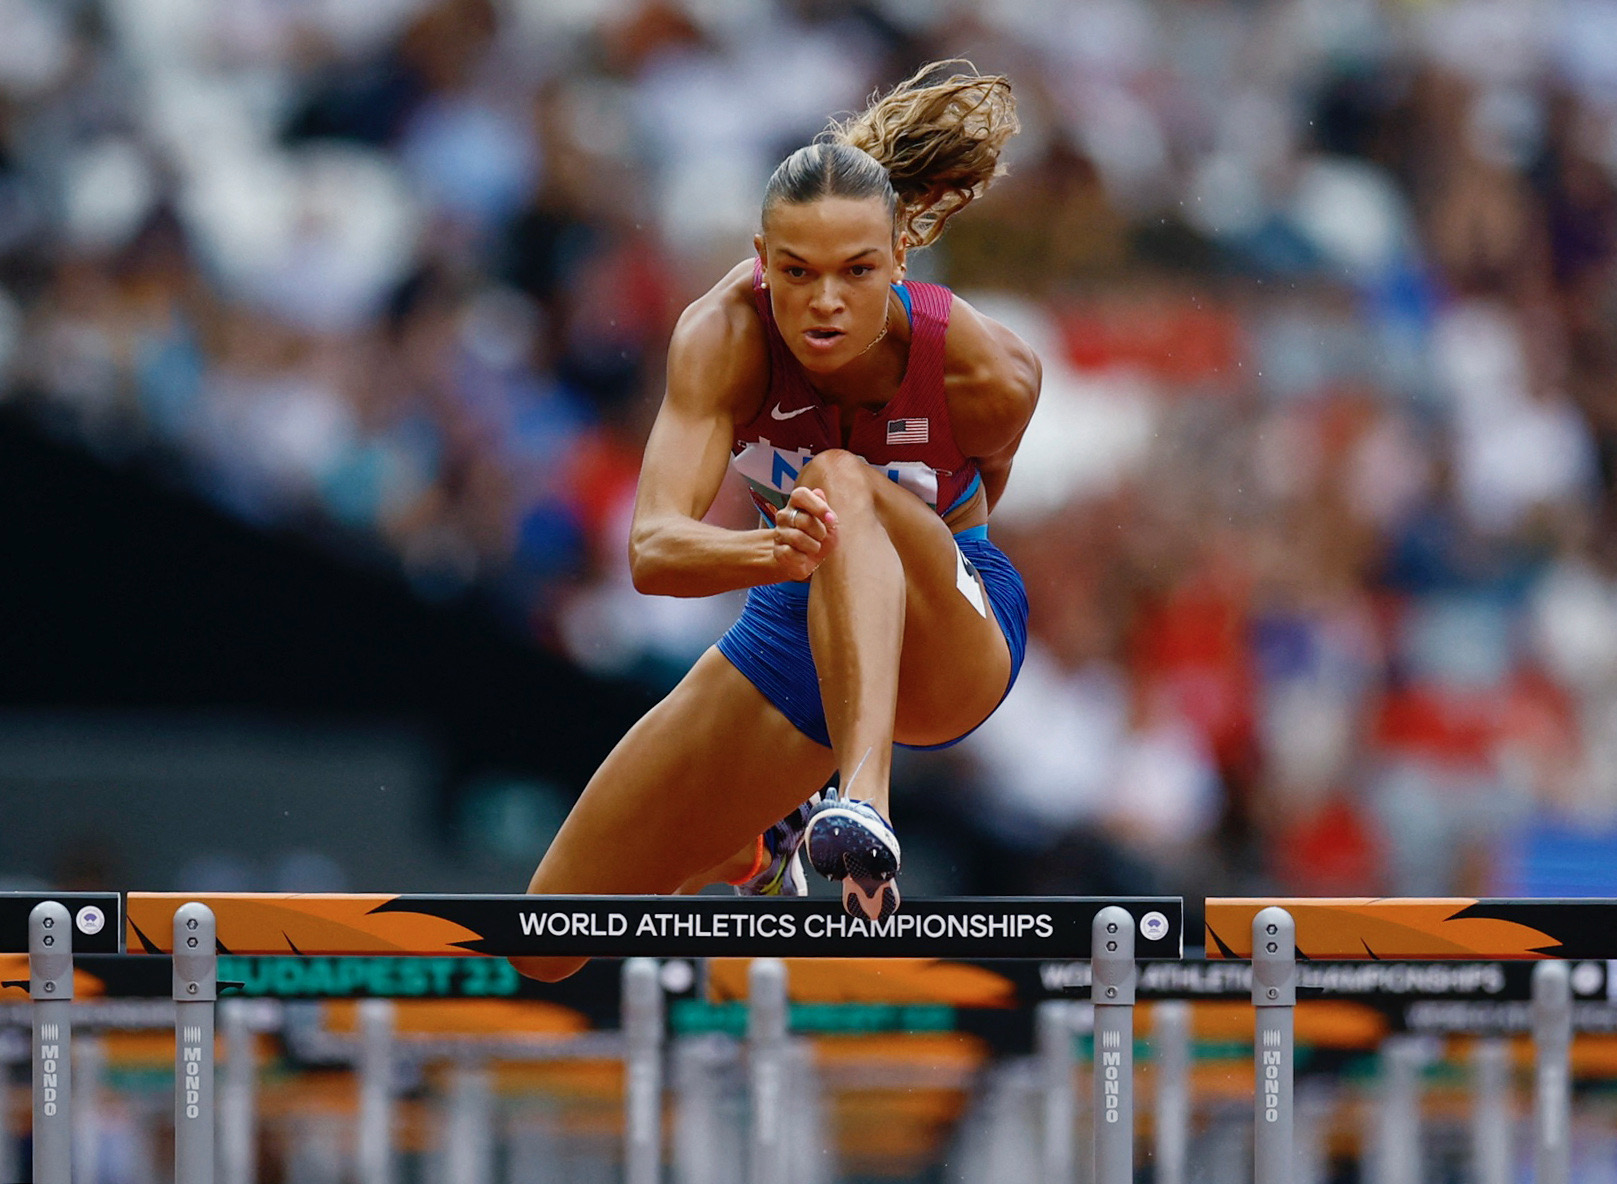 Anna Hall: Overcoming Hurdles and Rising to the Top